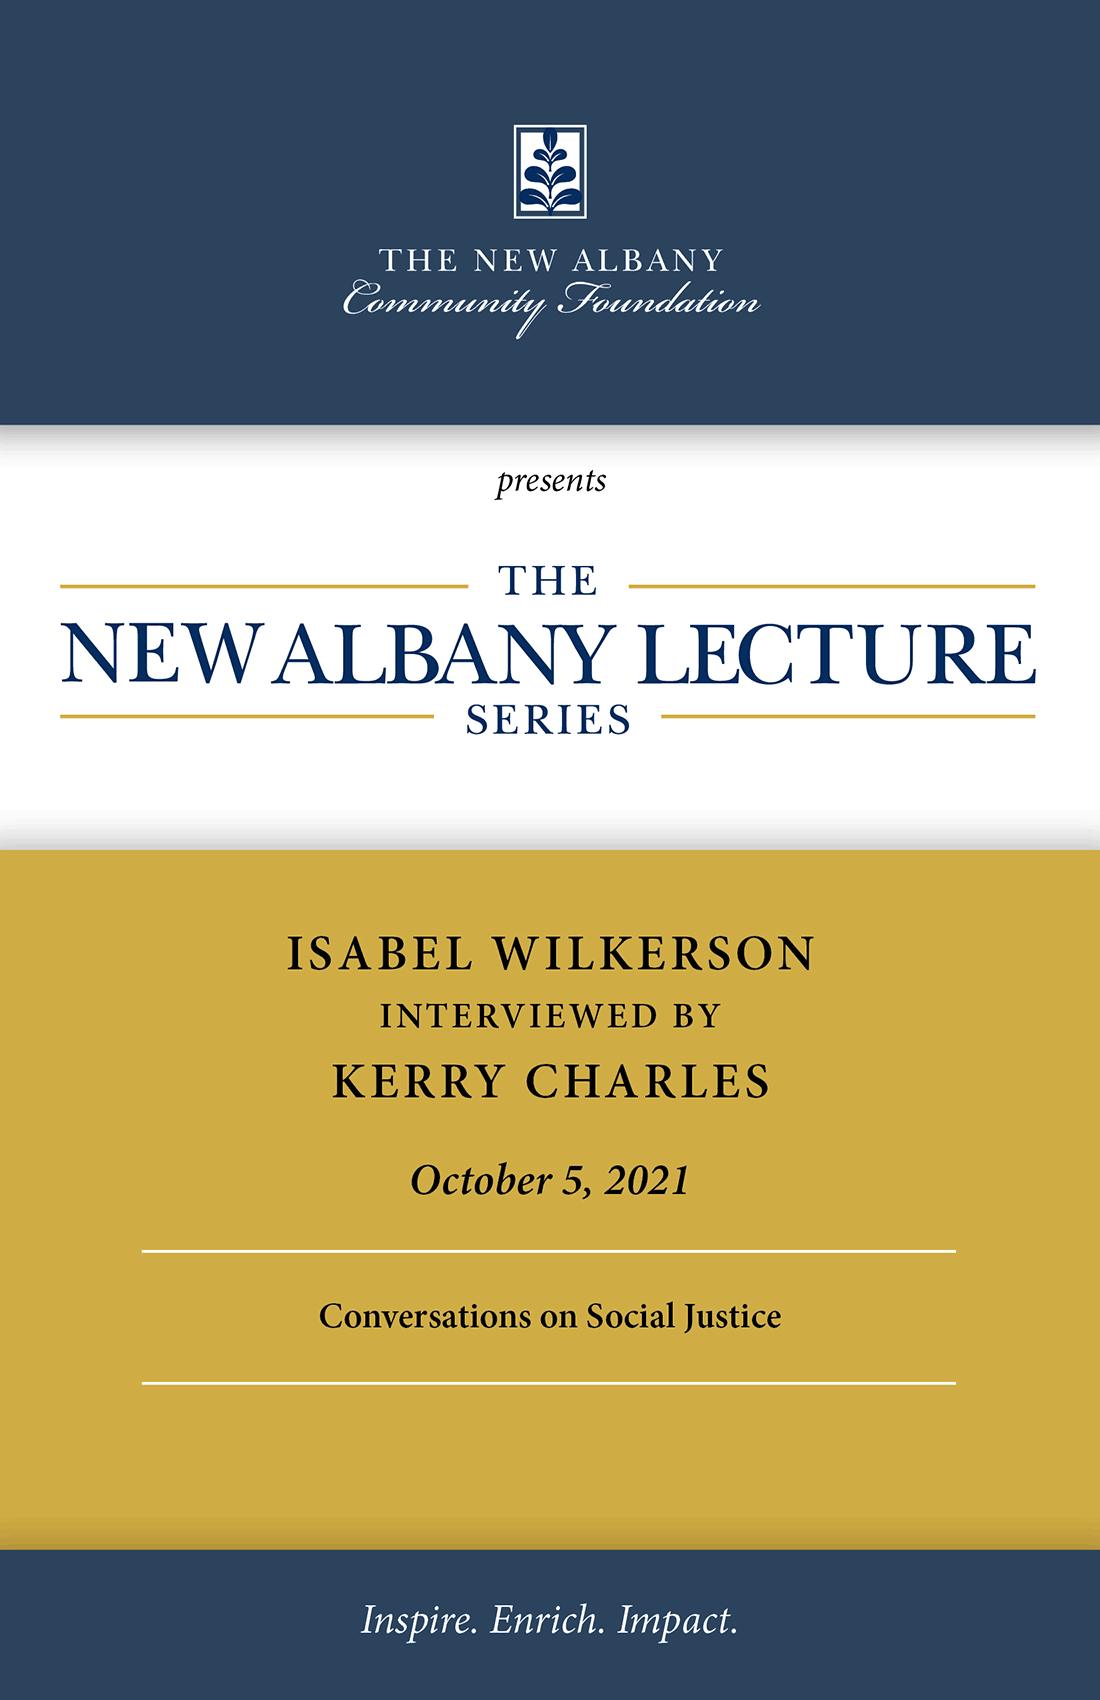 The New Albany Lecture Series - Isabel Wilkerson interviewed by Kerry Charles - October 5, 2021